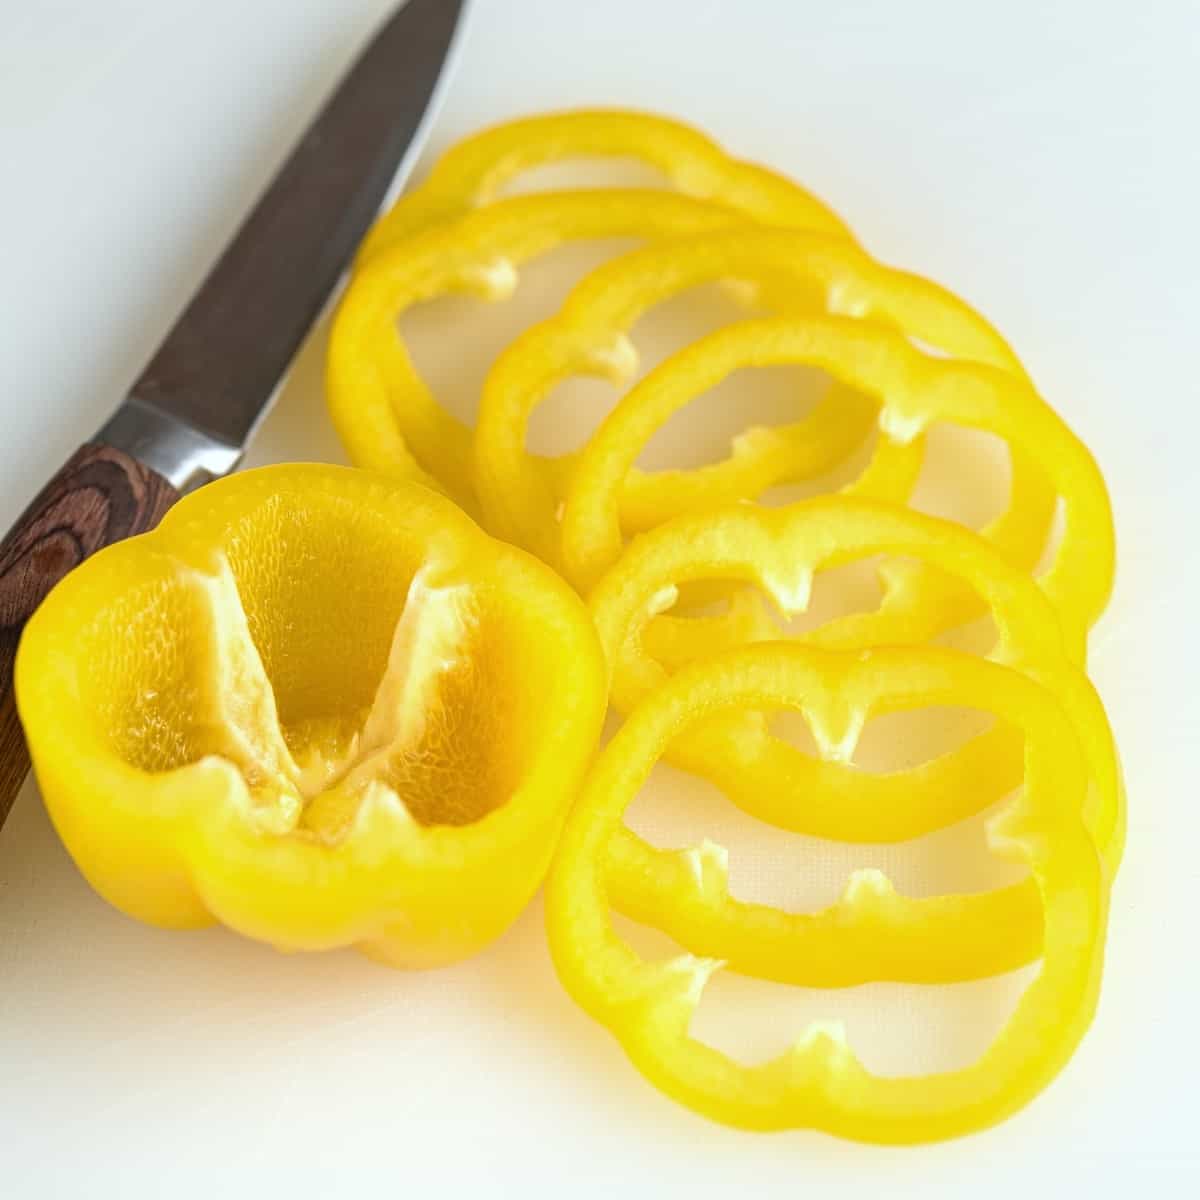 Yellow bell paprika sliced into rings.